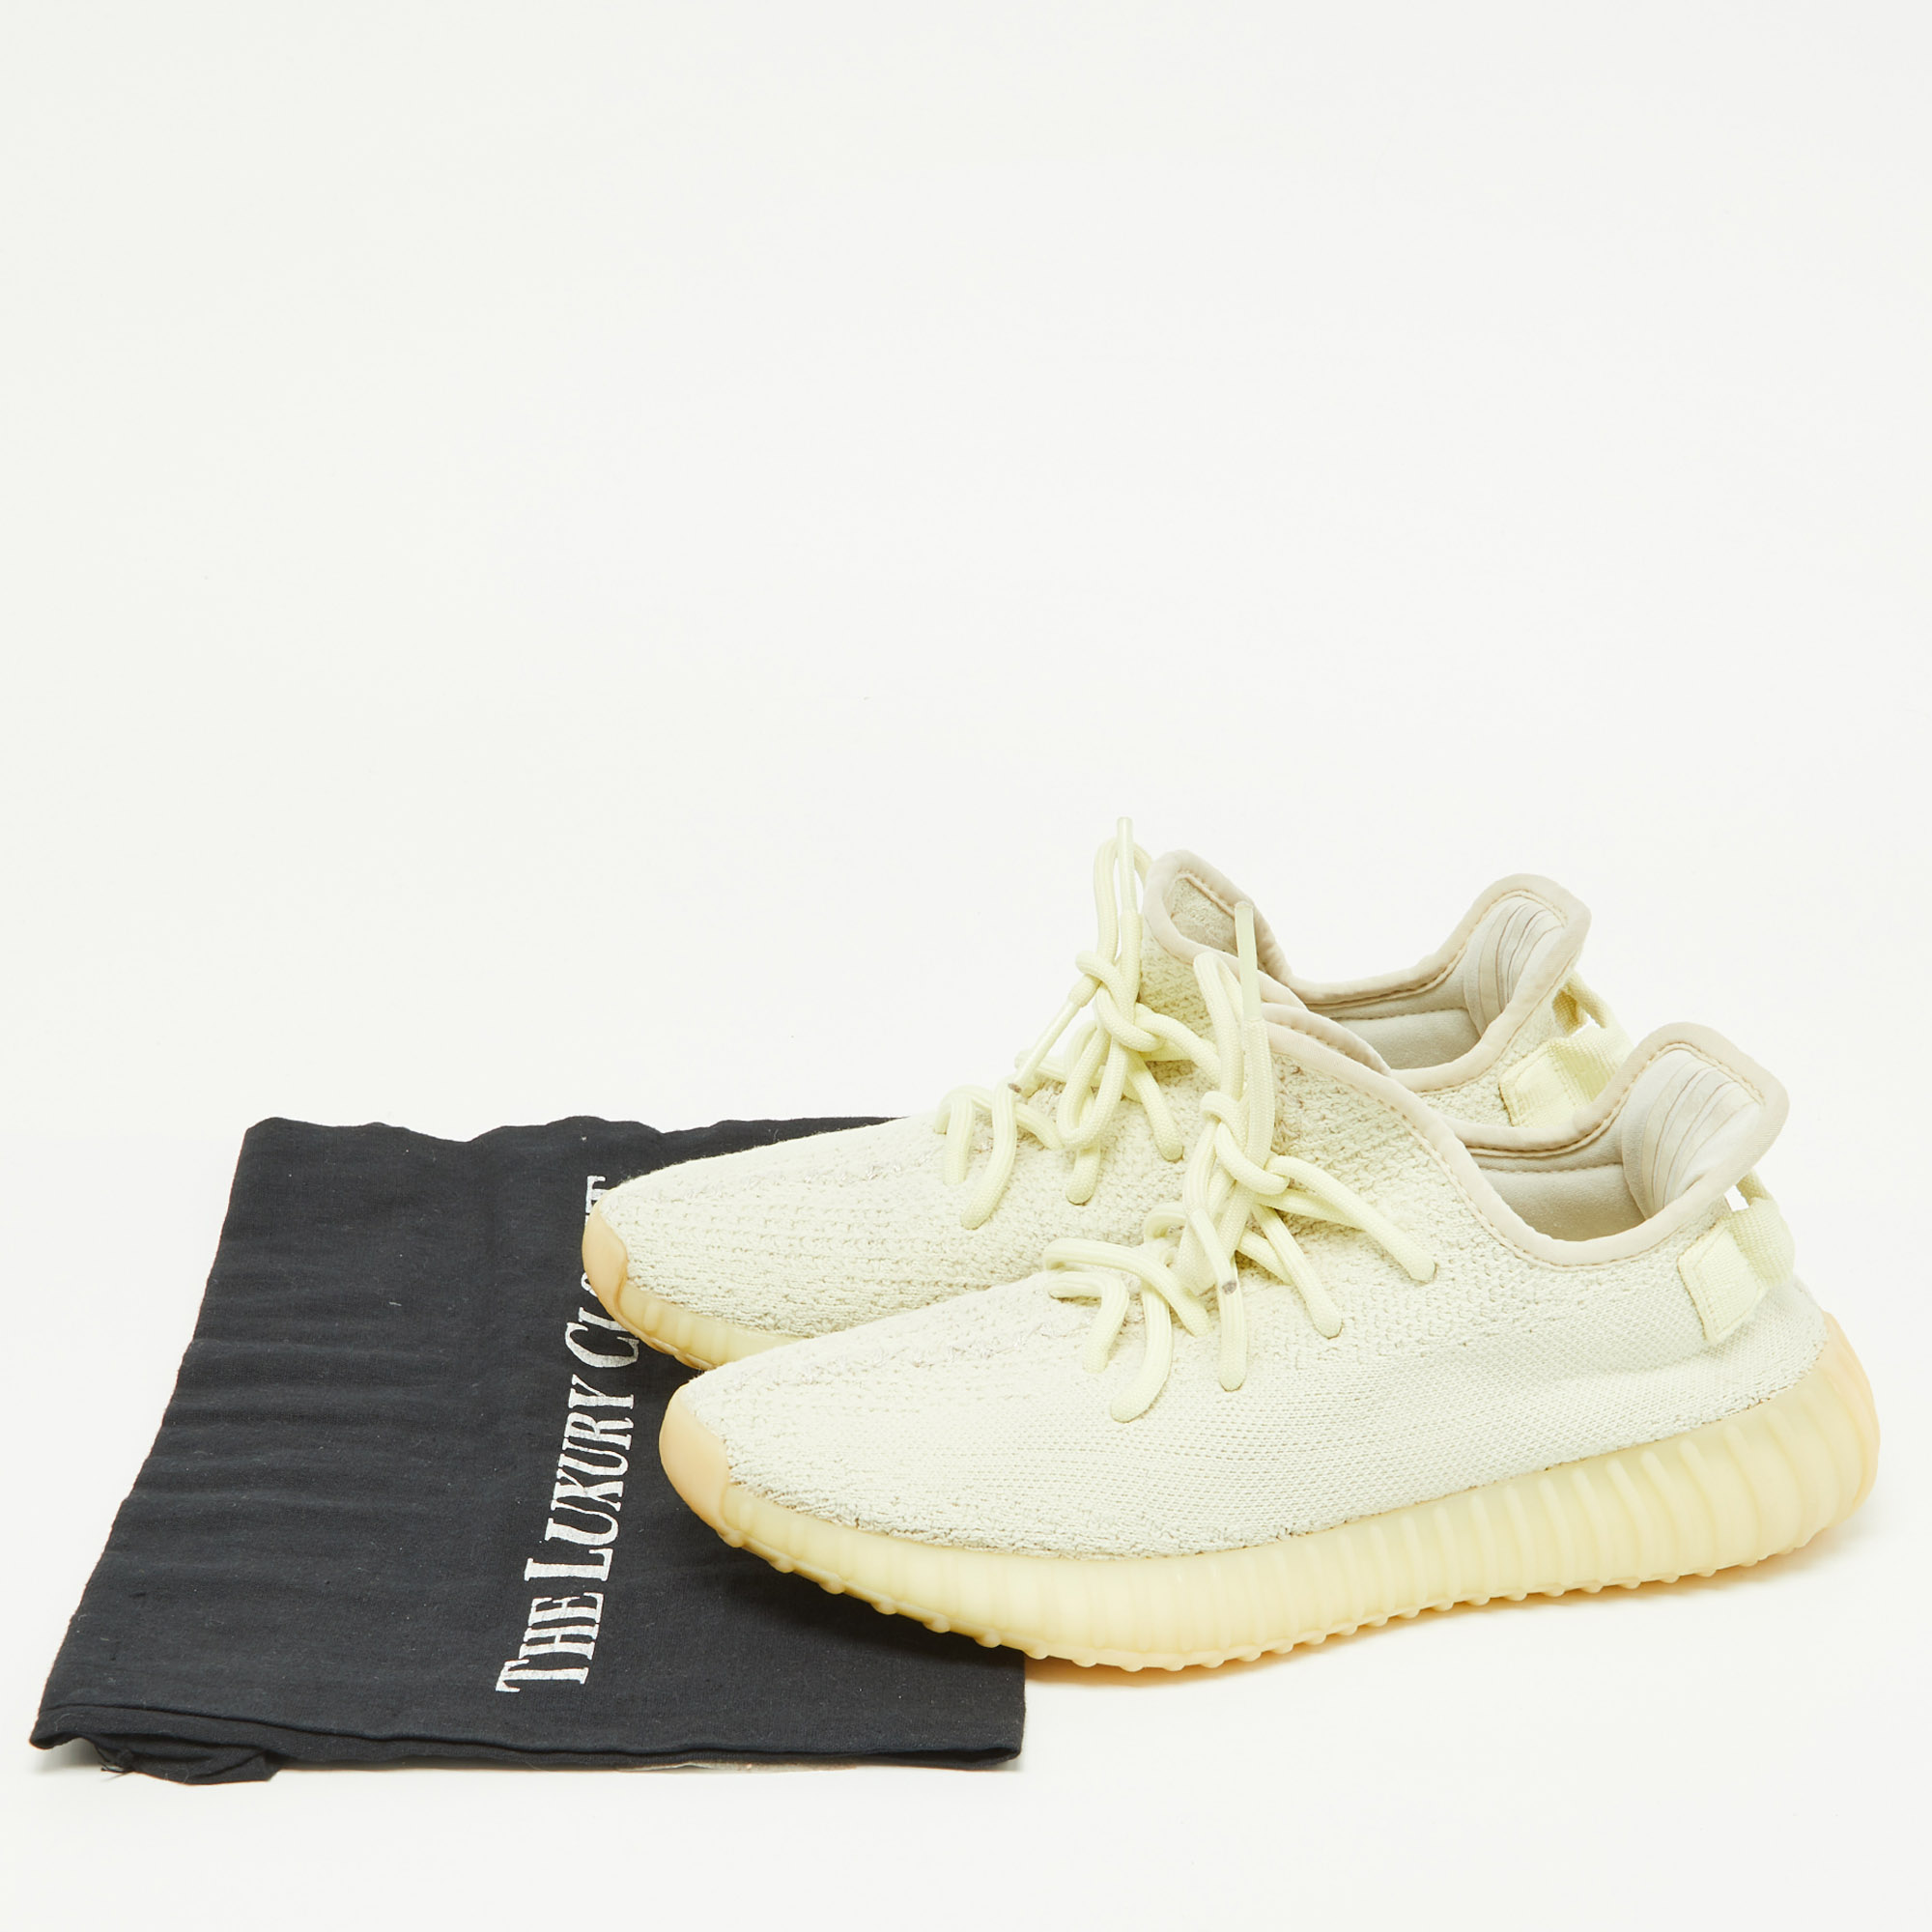 Yeezy X Adidas Yellow Knit Fabric Boost 350 V2 Butter Sneakers Size 38 2/3